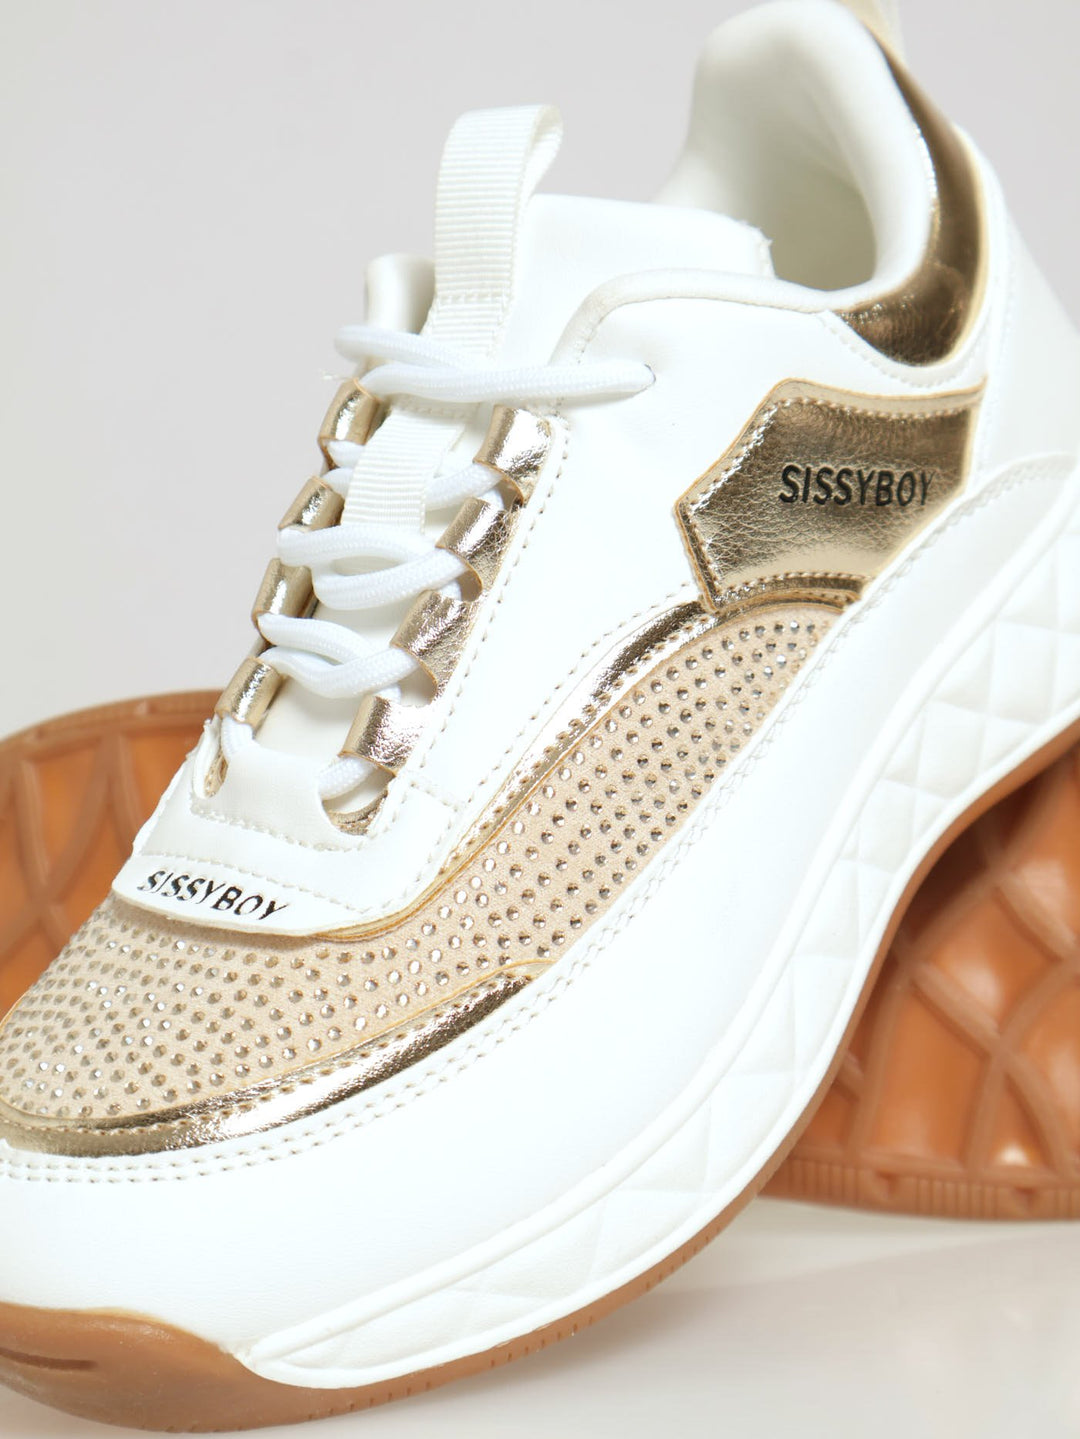 Bailey Lace Up Sneaker - White/Beige